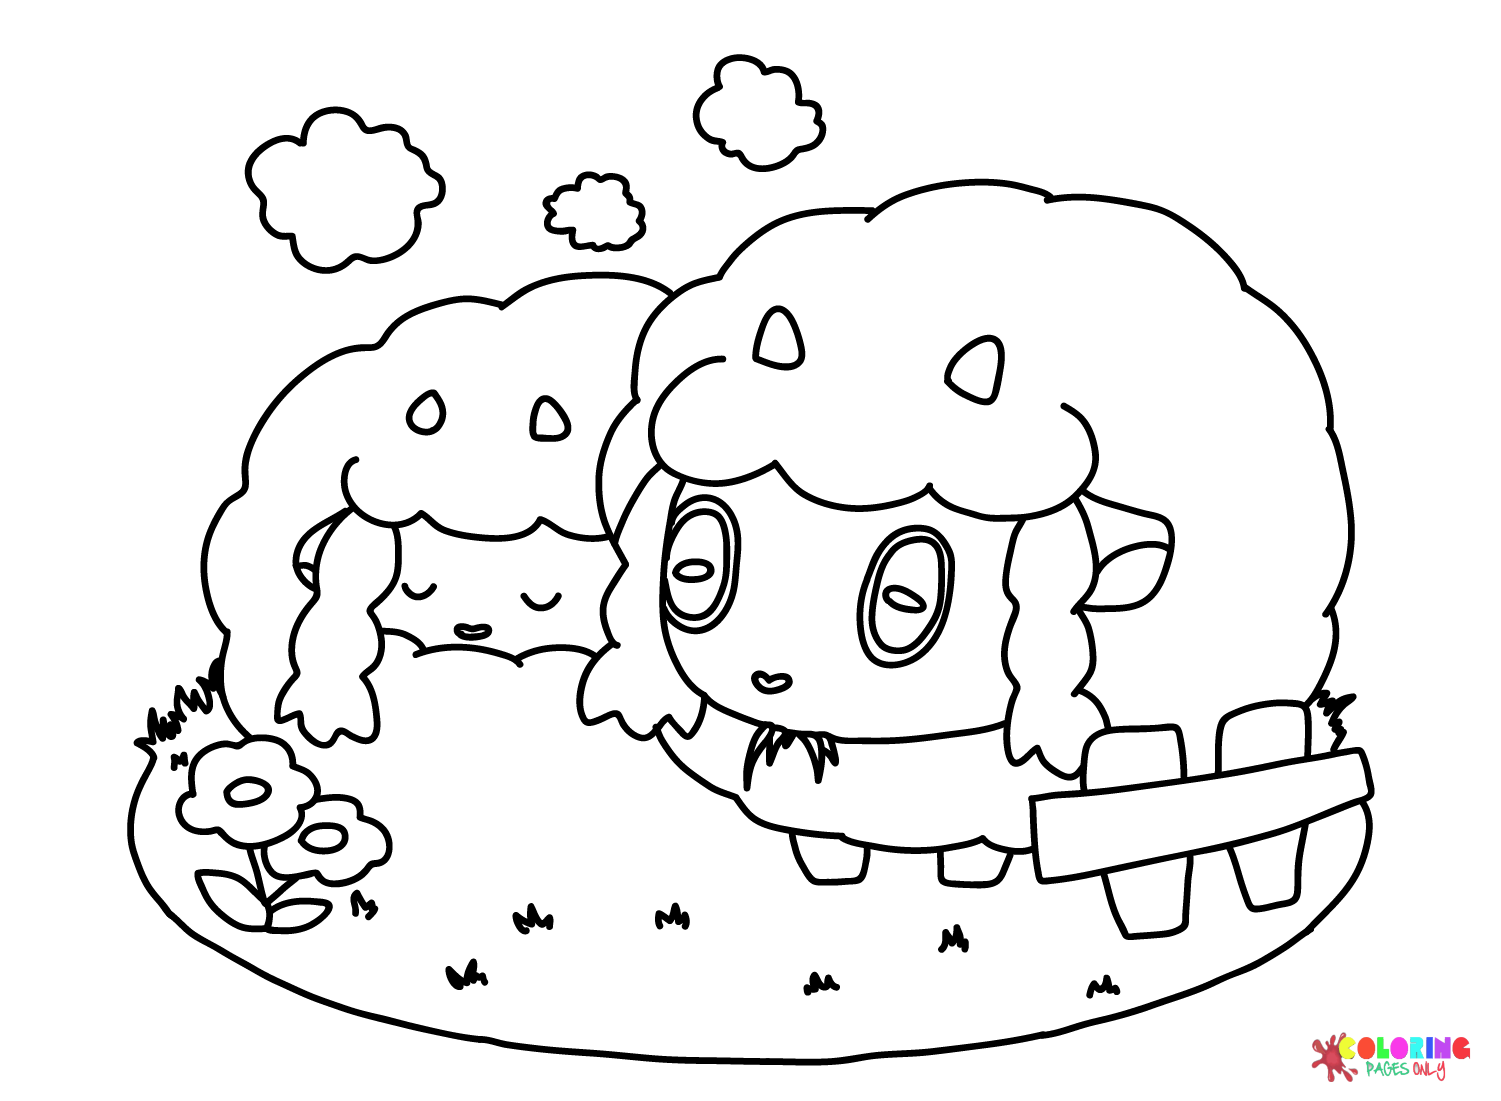 Wooloo from Pokemon from Wooloo